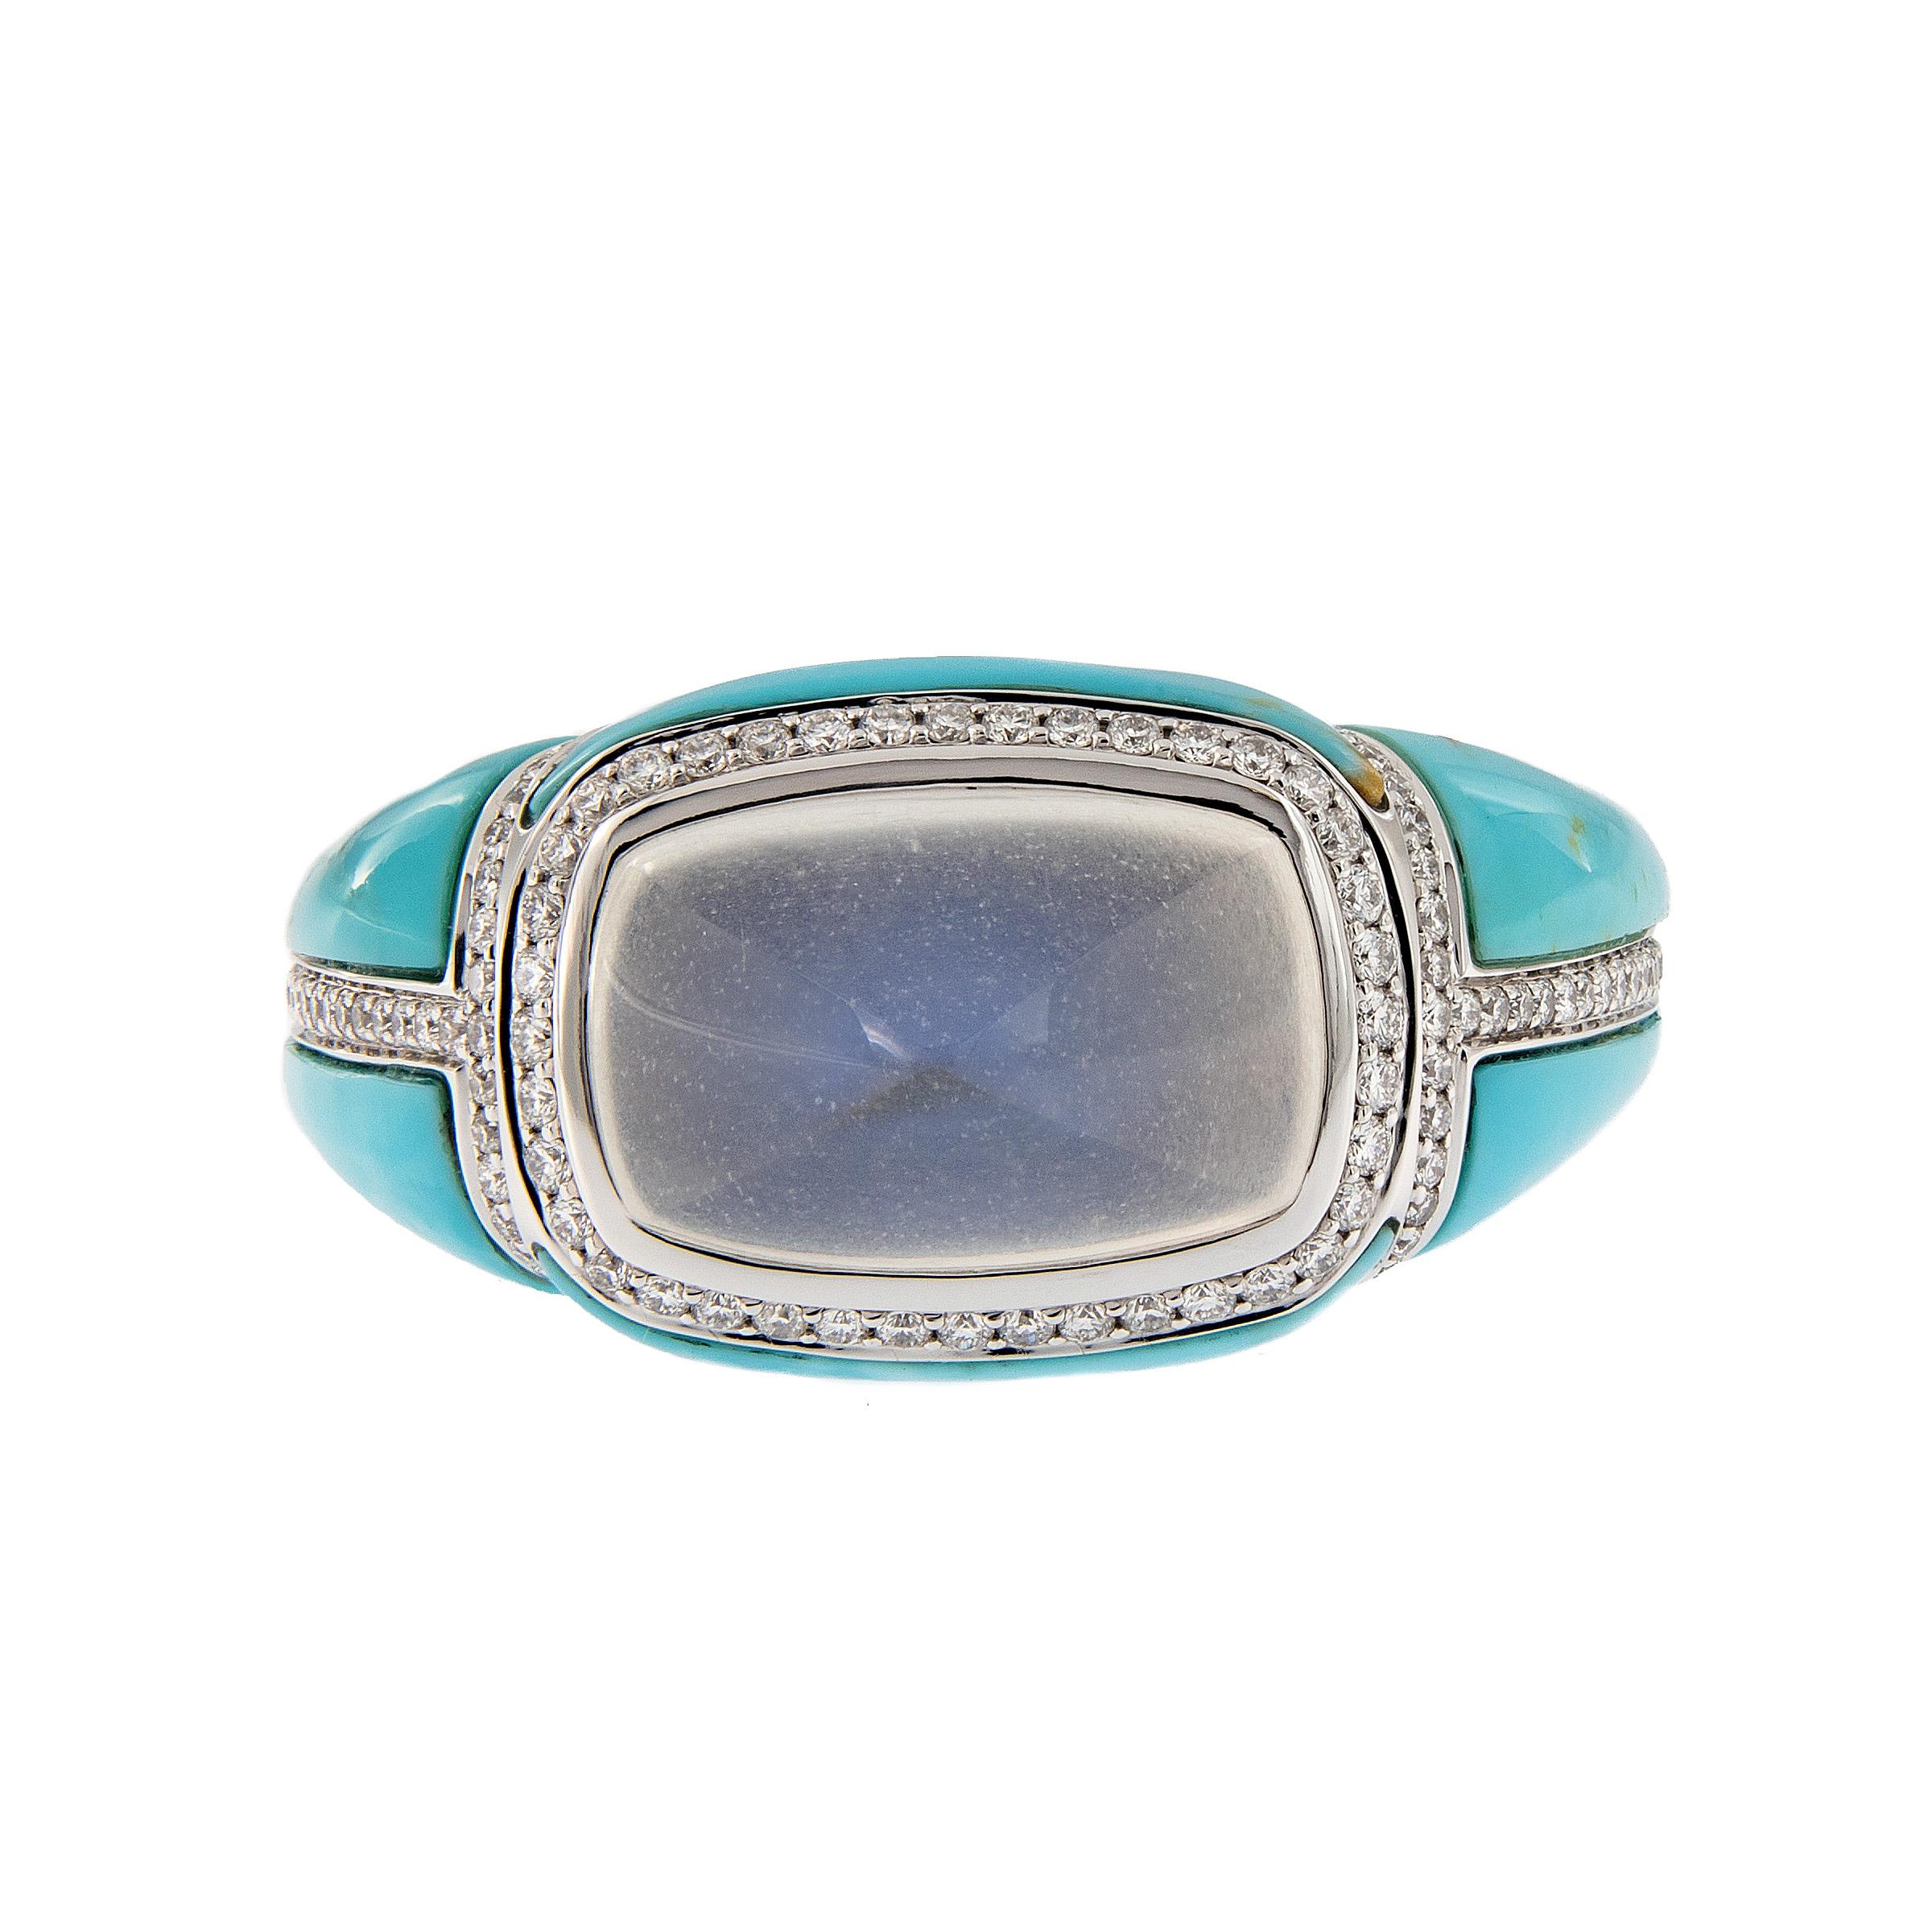 This beautifully crafted unique dome ring is a stunner! Ring centers around a sugarloaf blue moonstone and over 9ct of fine 